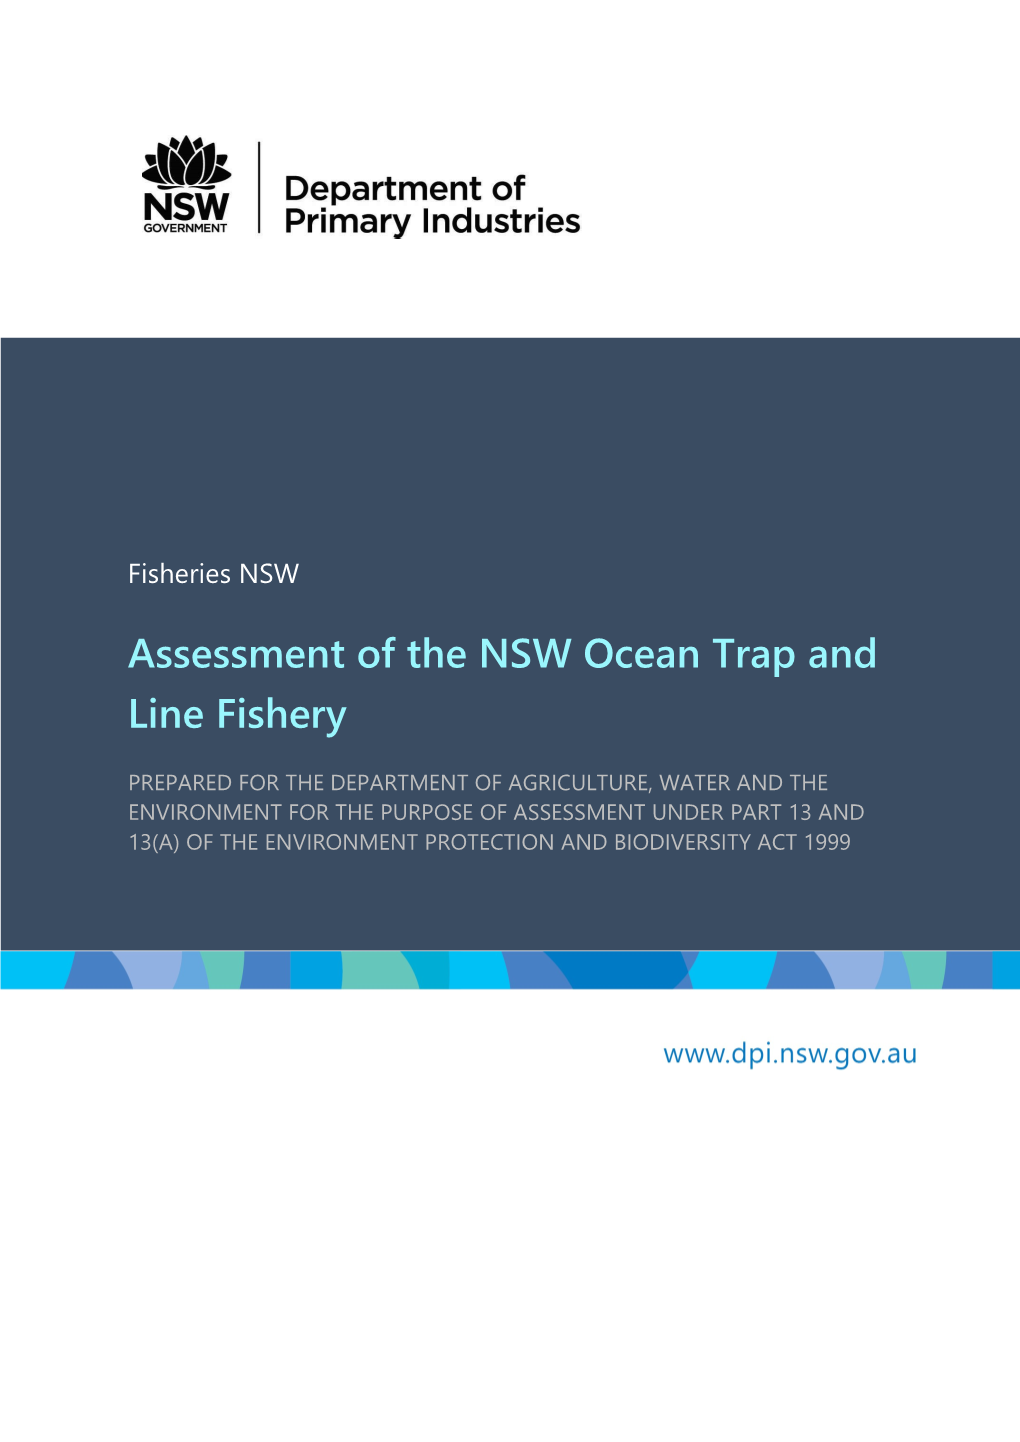 Assessment of the NSW Ocean Trap and Line Fishery